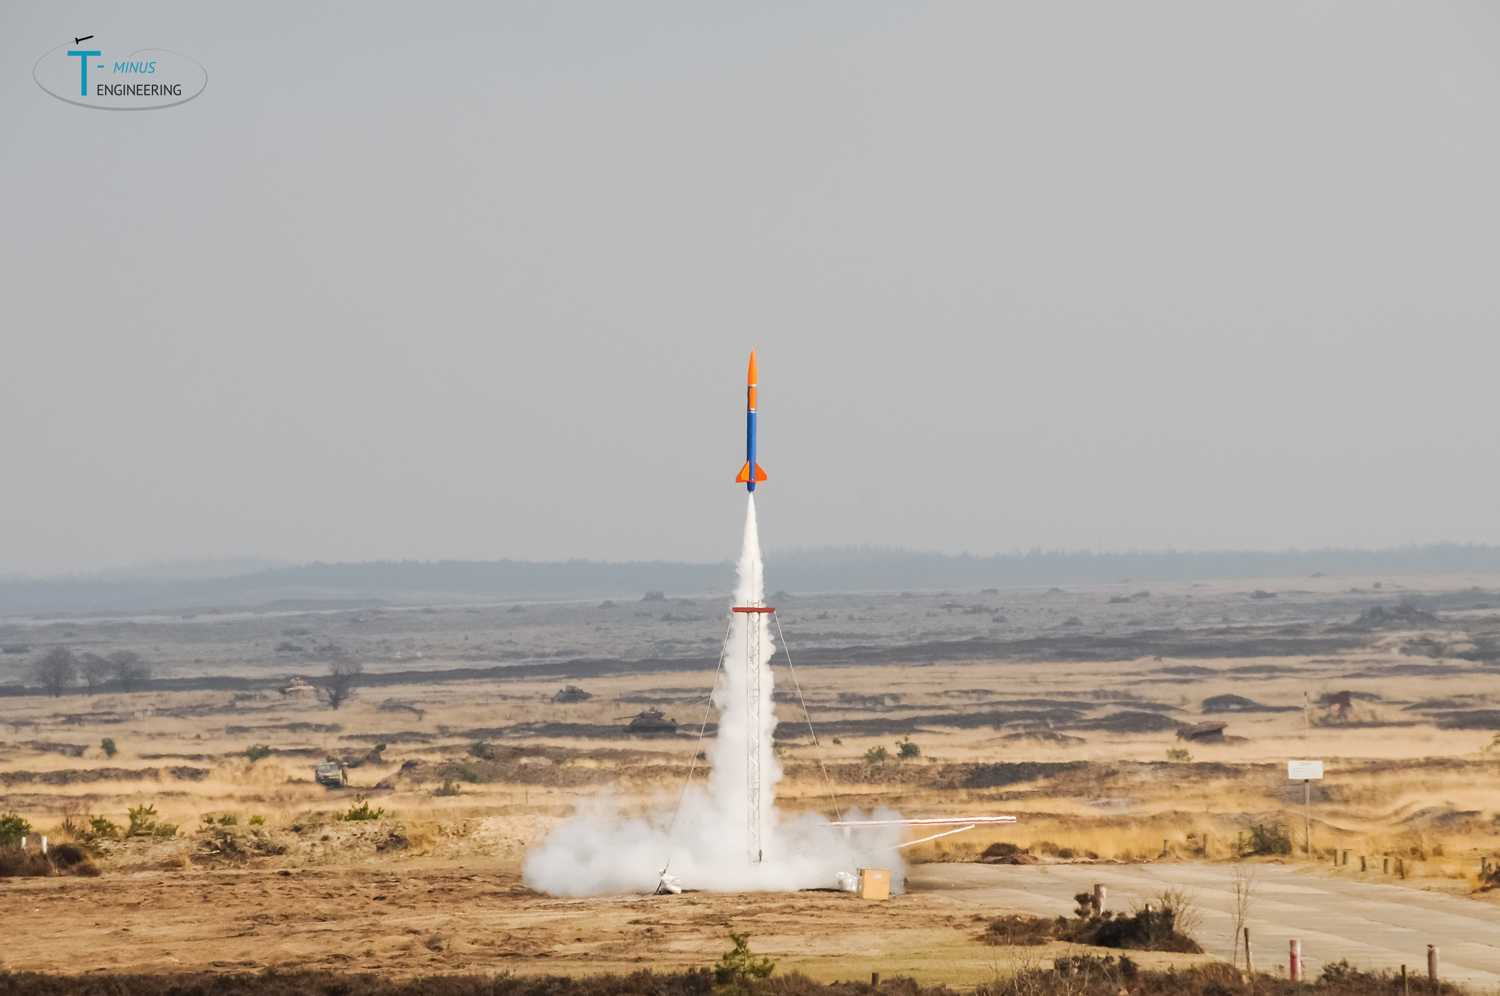 The T-Minus CanSat launcher: for launching and deploying CanSats